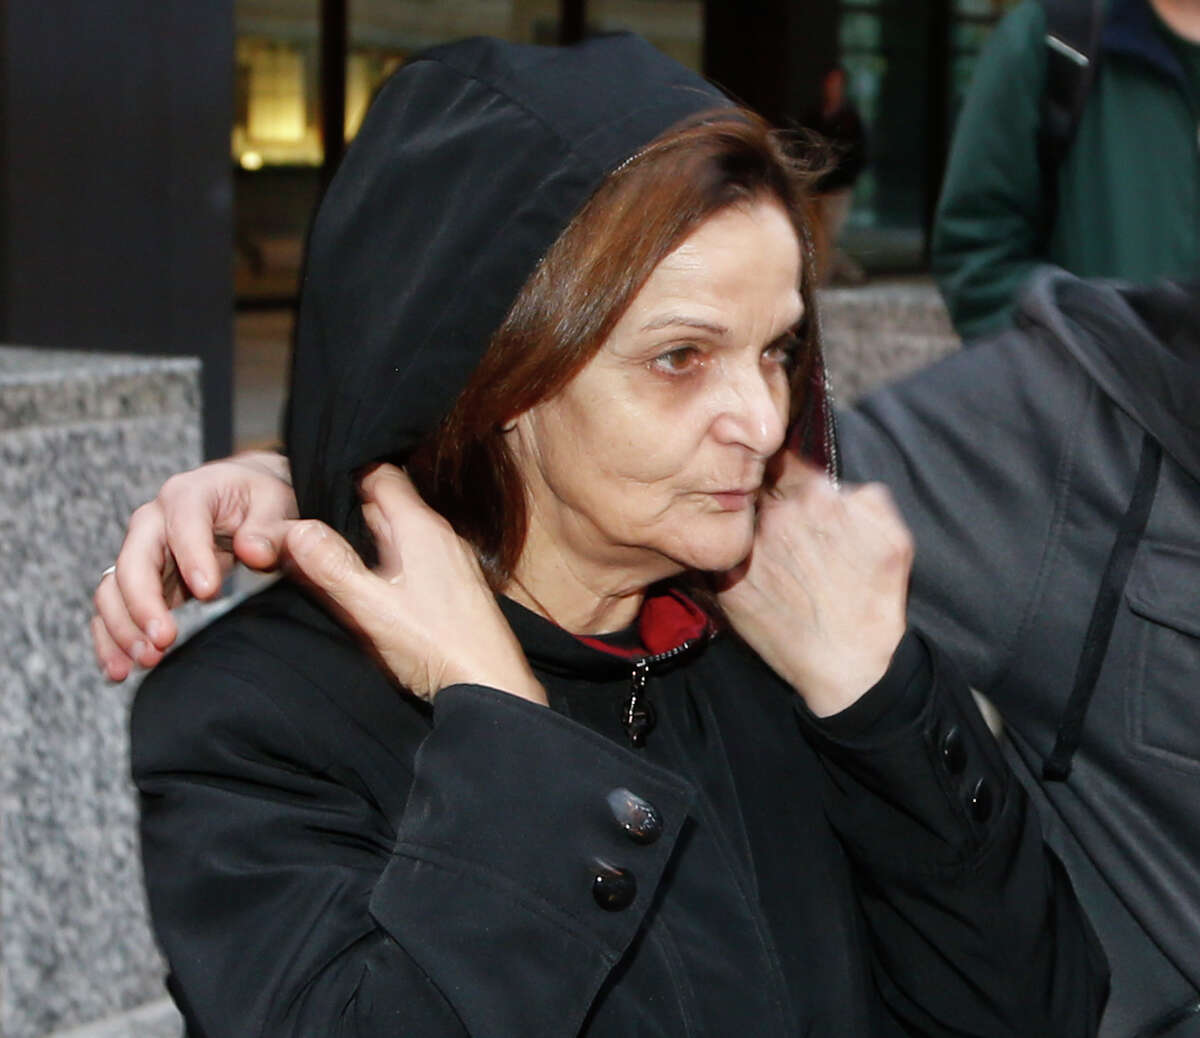 FILE - In this Oct. 22, 2013, file photo, Rasmieh Yousef Odeh stands outside the federal courthouse in Chicago. She is charged with immigration fraud, accused of lying to U.S. immigration officials when she failed to disclose her conviction for a terrorist bombing at a Jerusalem supermarket in 1969 that killed two people. On Thursday, Oct. 2, 2014, U.S. District Judge Gershwin Drain in Detroit rejected Odehâs lawyersâ request to throw out the charges on the basis that they were the result of a selective prosecution because of Odehâs activism in the Arab-American community. The judge scheduled her trial to begin Nov. 2, 2014 in Detroit. (AP Photo/Charles Rex Arbogast, File)